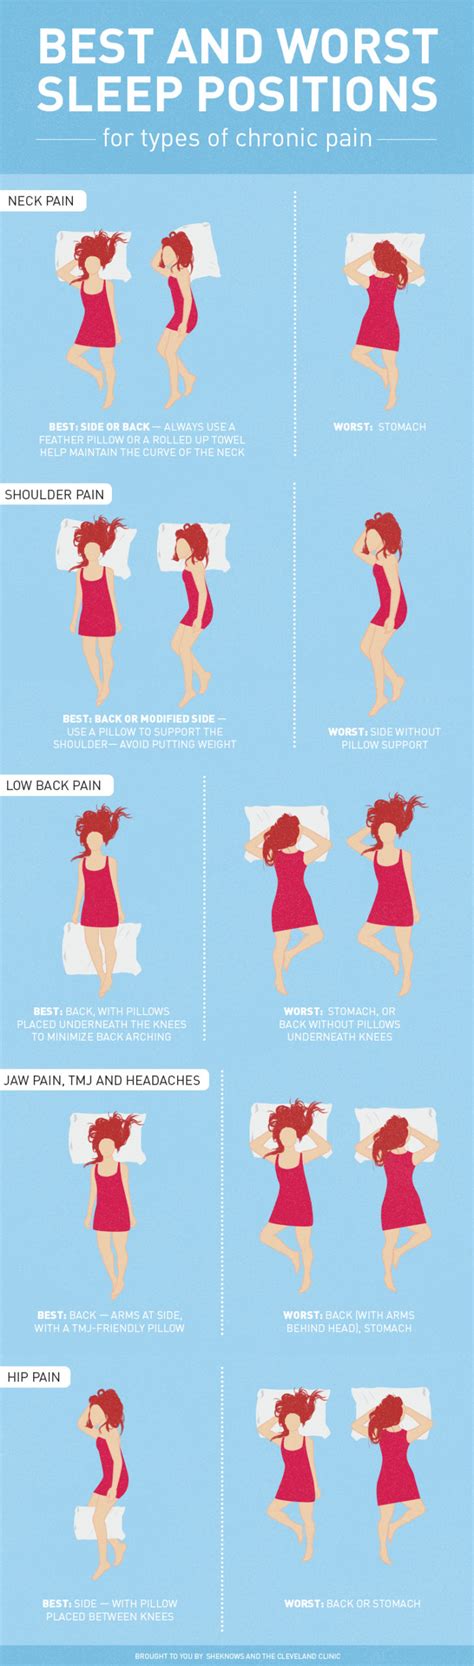 This Infographic Shows The Best And Worst Sleeping Positions For Common